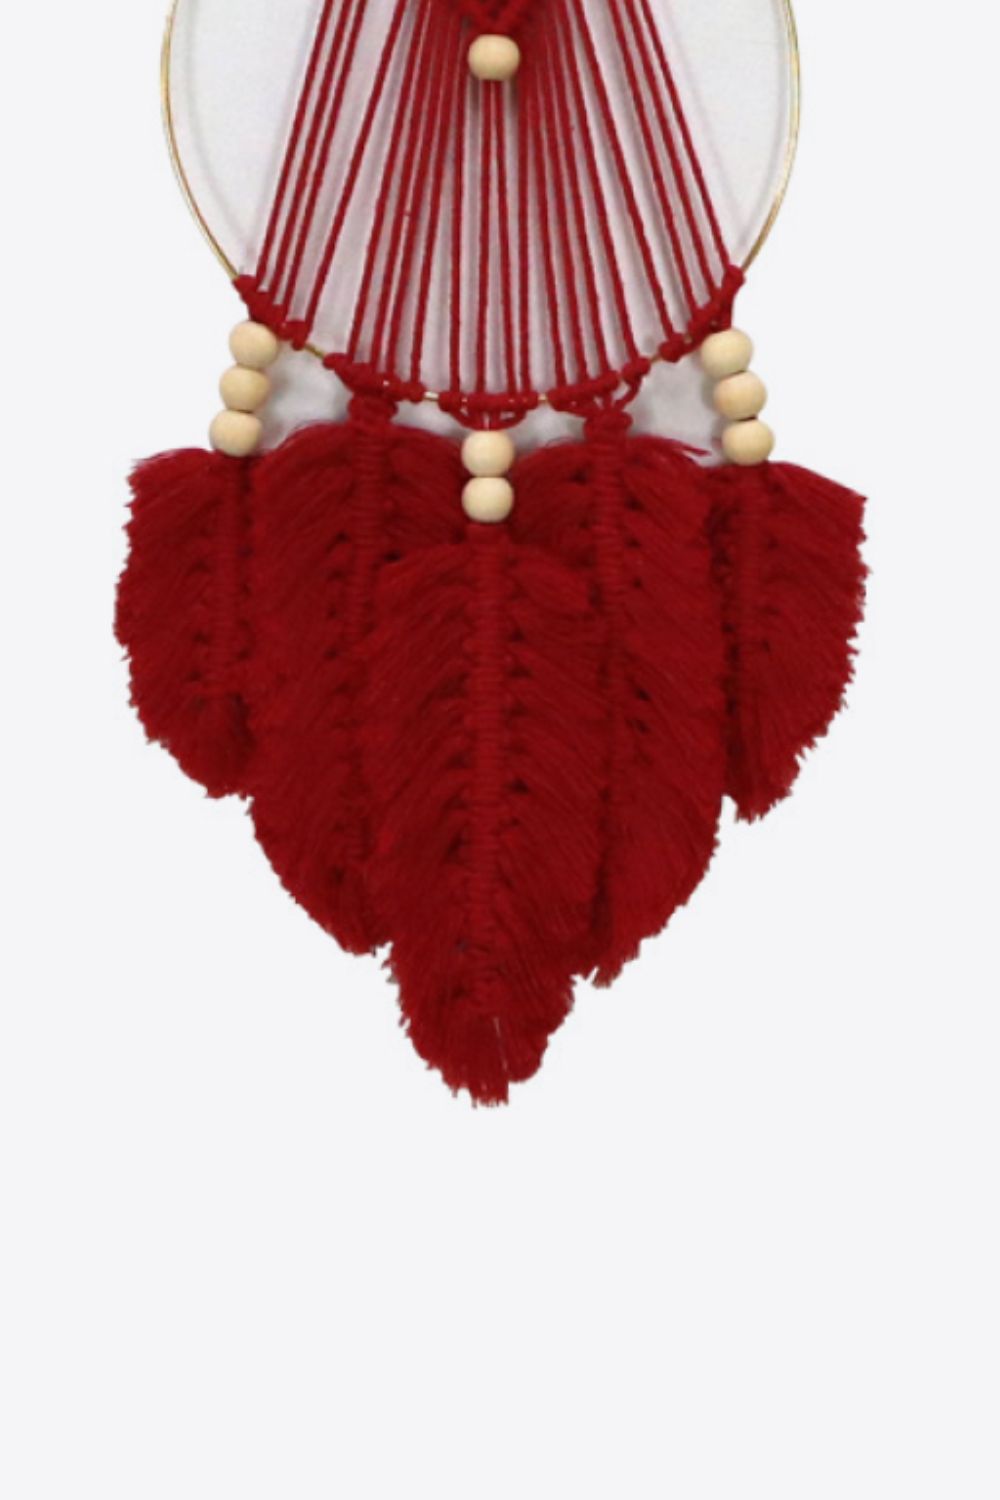 Feather Macrame Wall Hanging Decor - AllIn Computer